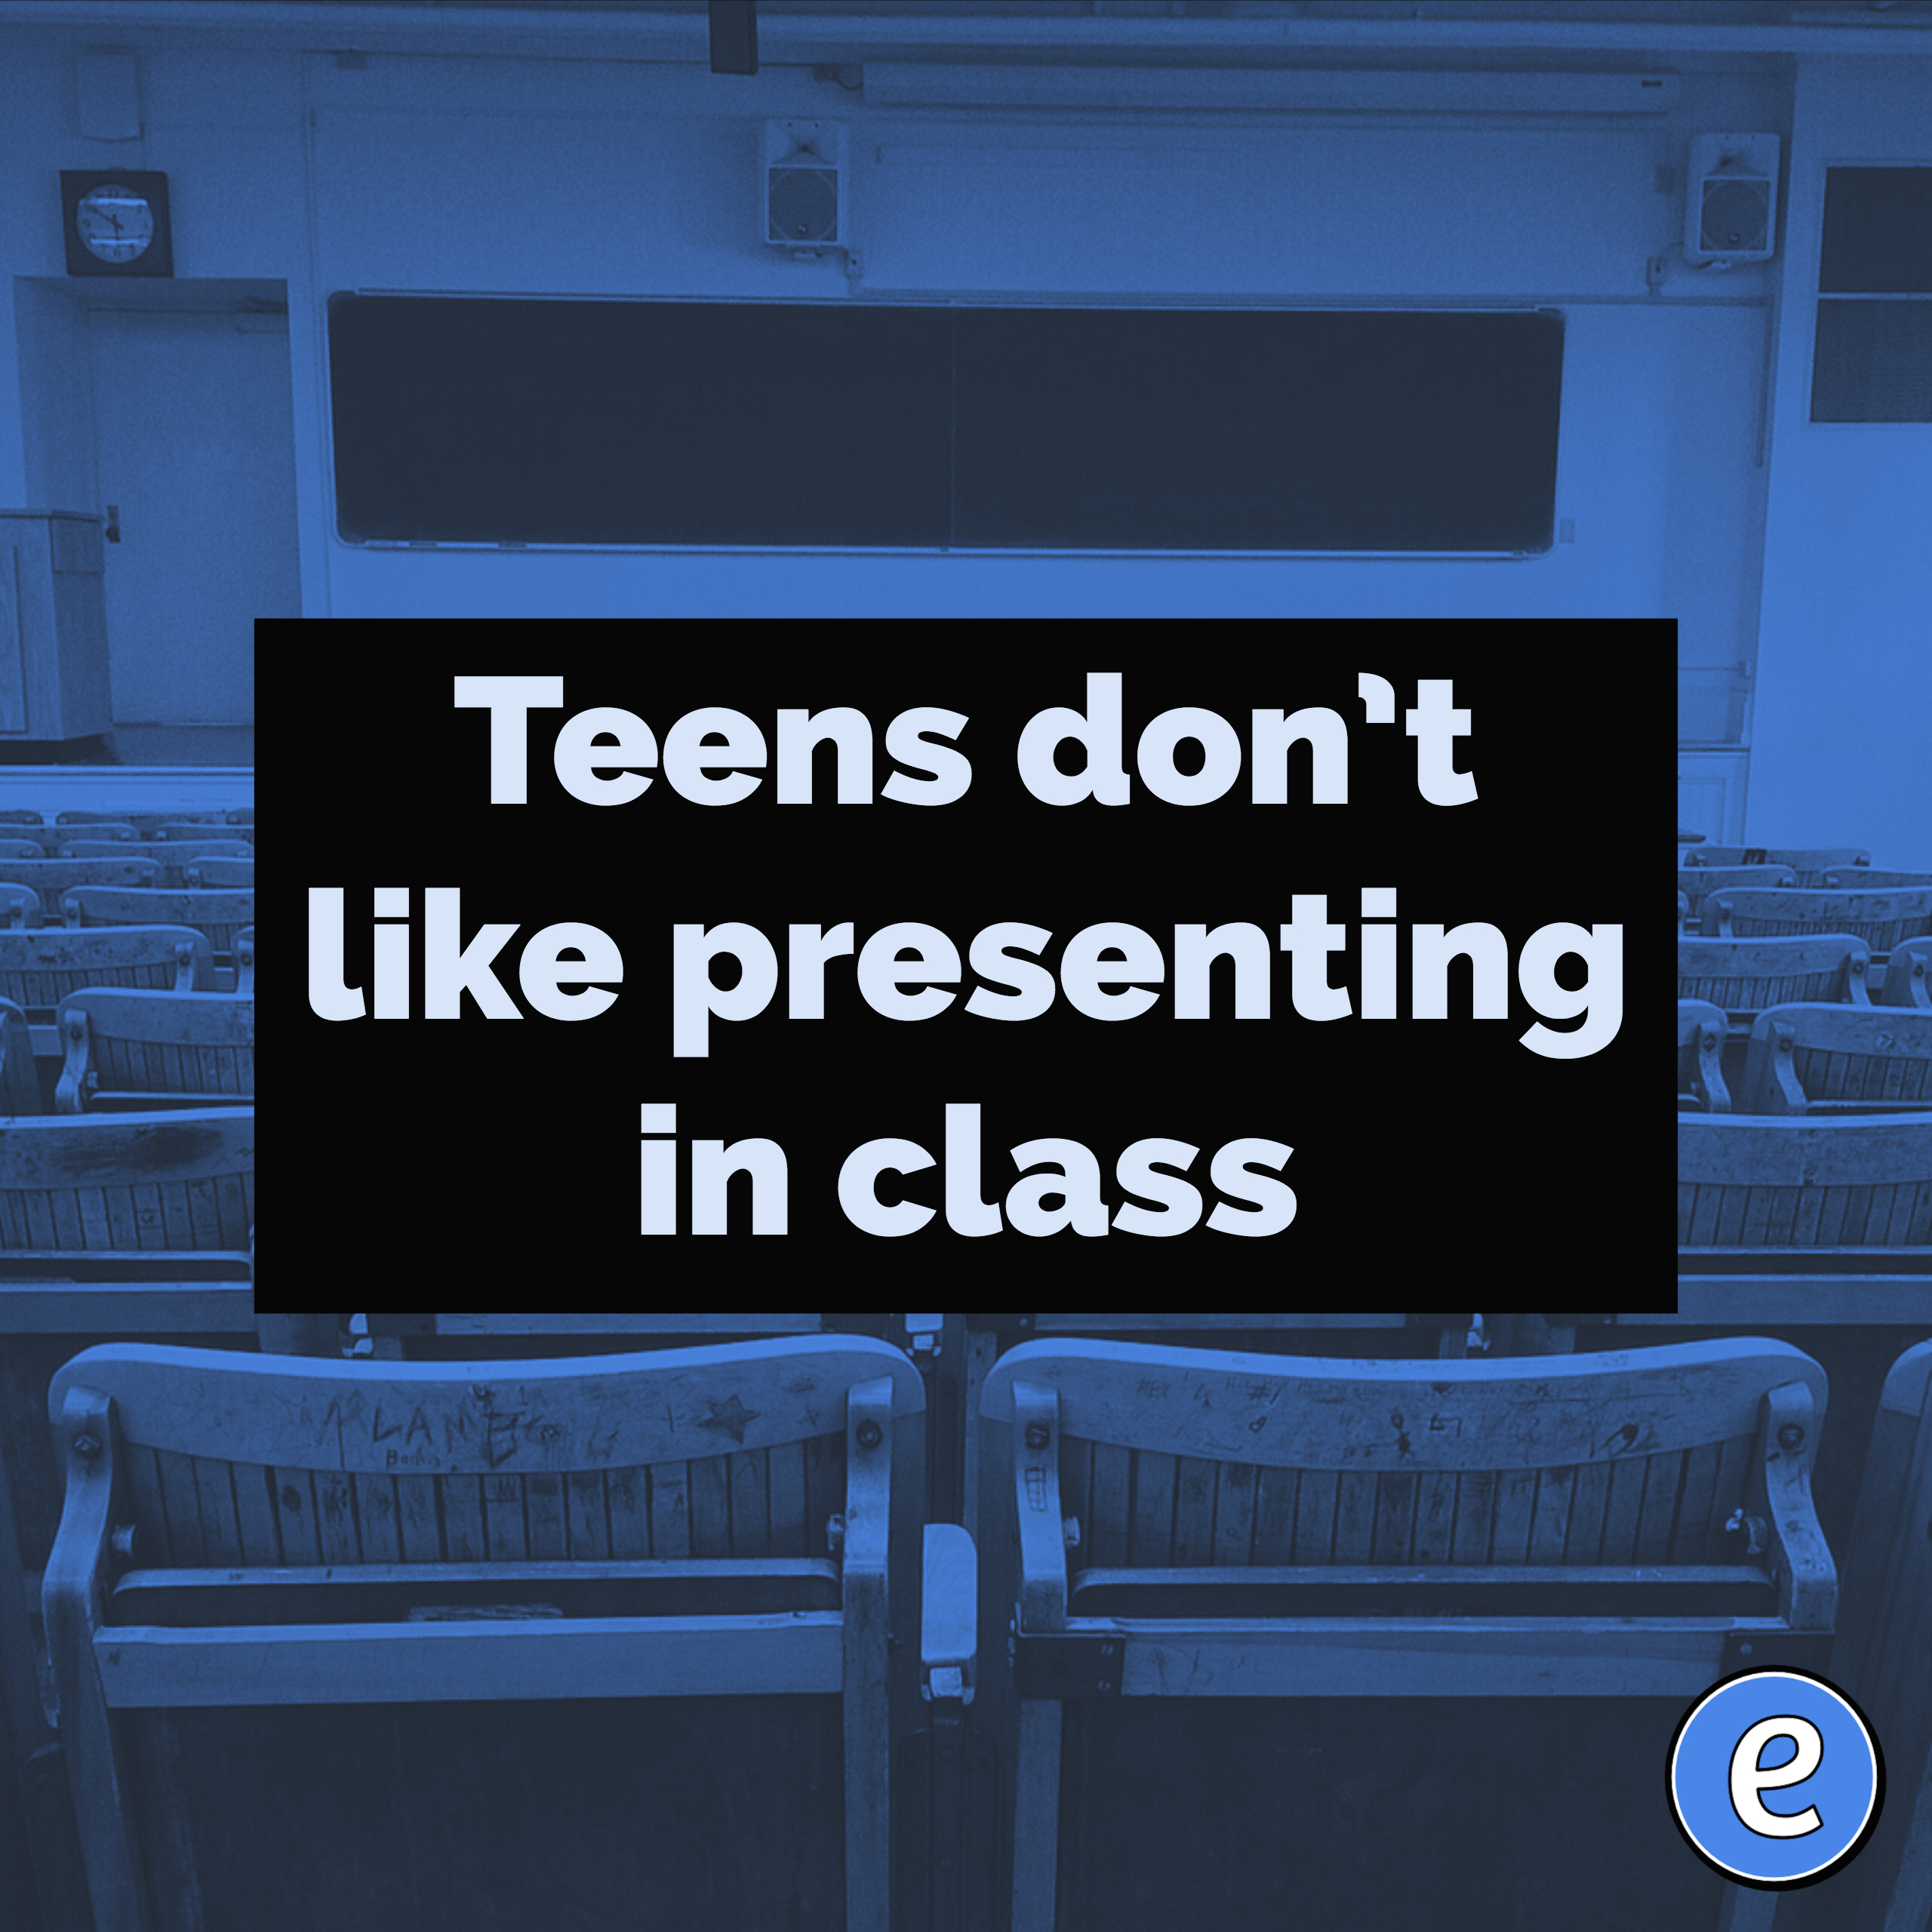 Teens don’t like presenting in class